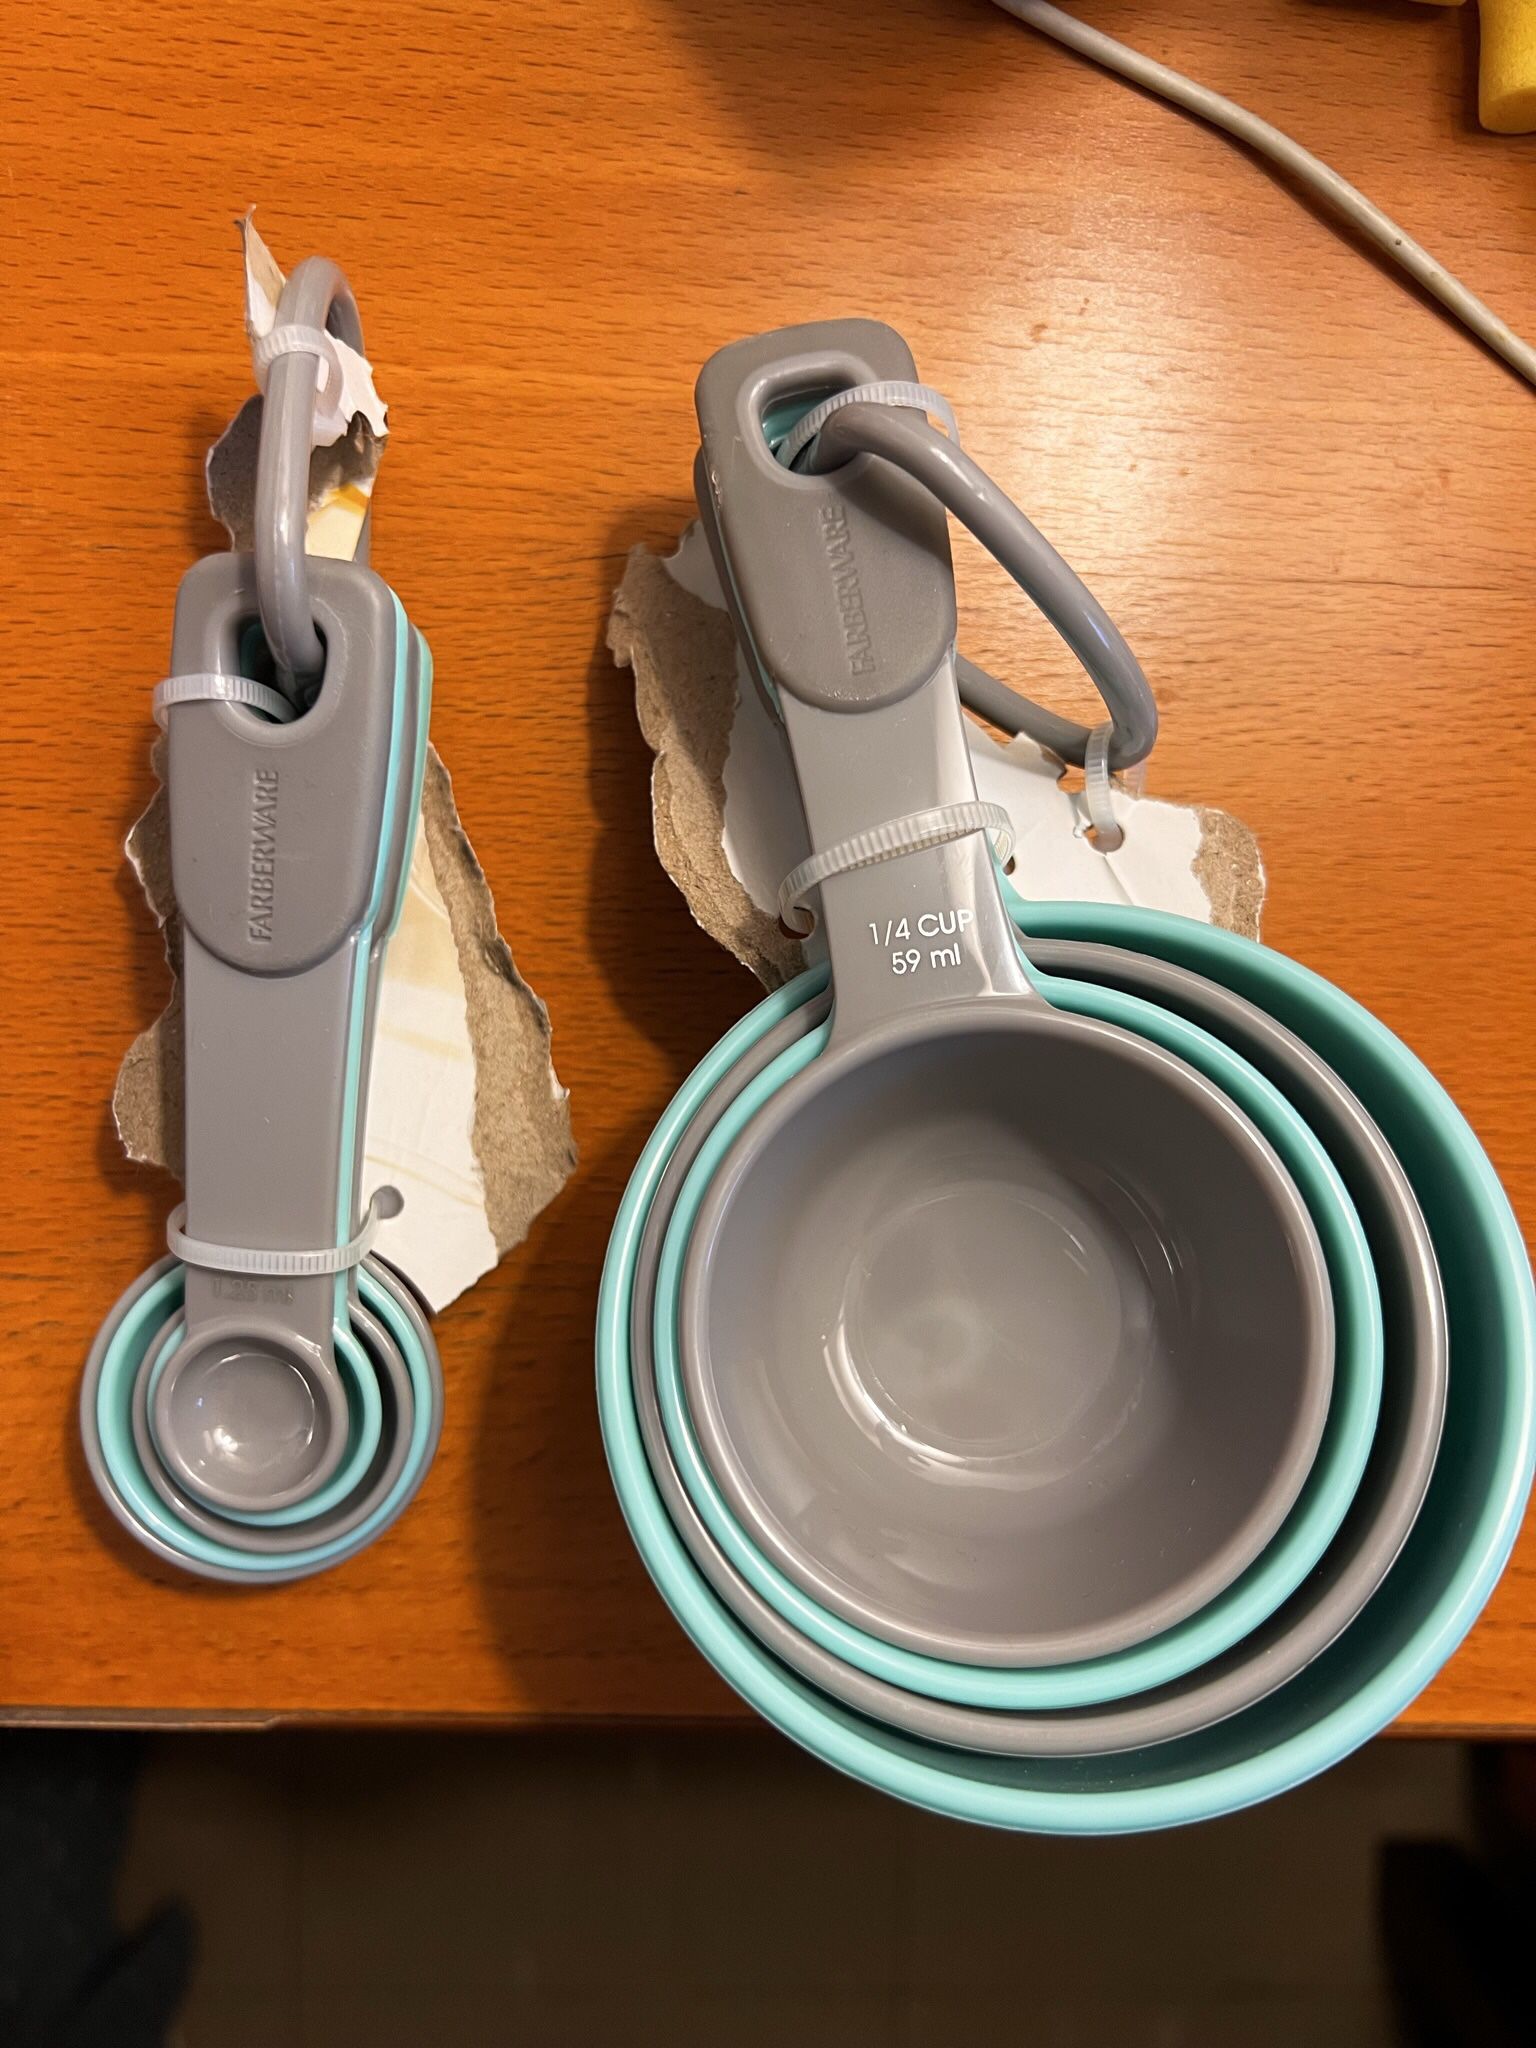 Farberware Measuring Cups And Spoons for Sale in New York, NY - OfferUp